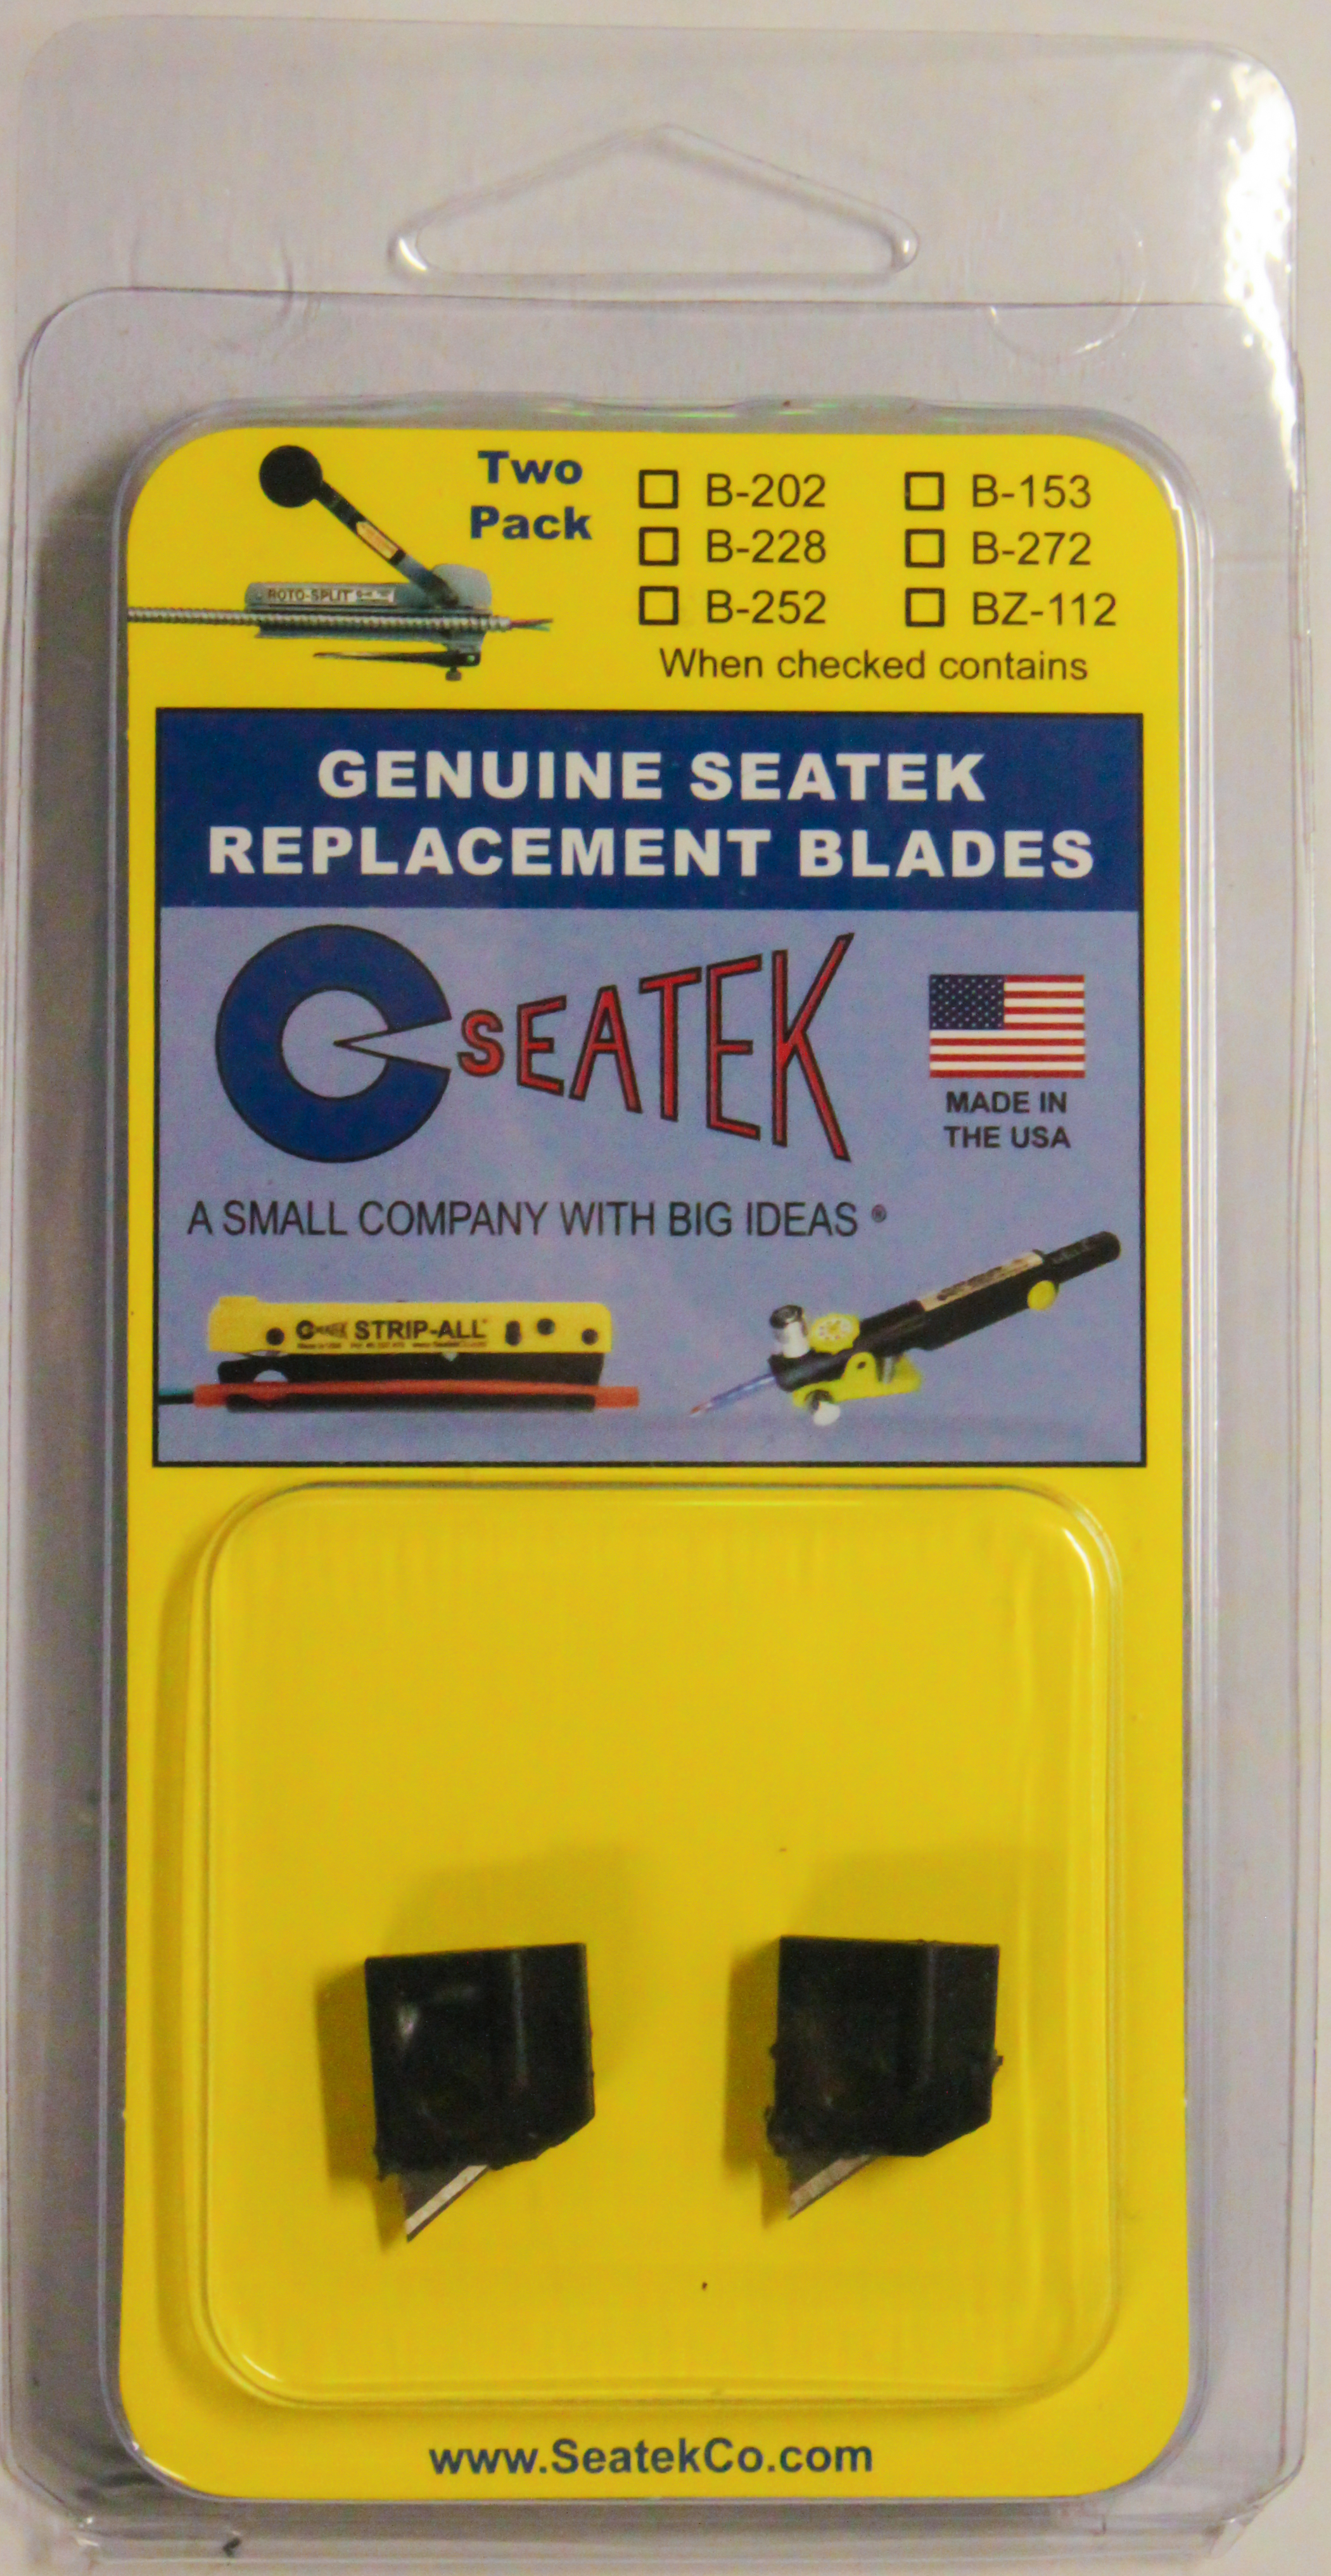 B-202-MAD 723875802028 Replacement blade cartridge for the Strip-All.  Cartridge is sealed in the tool for safety.